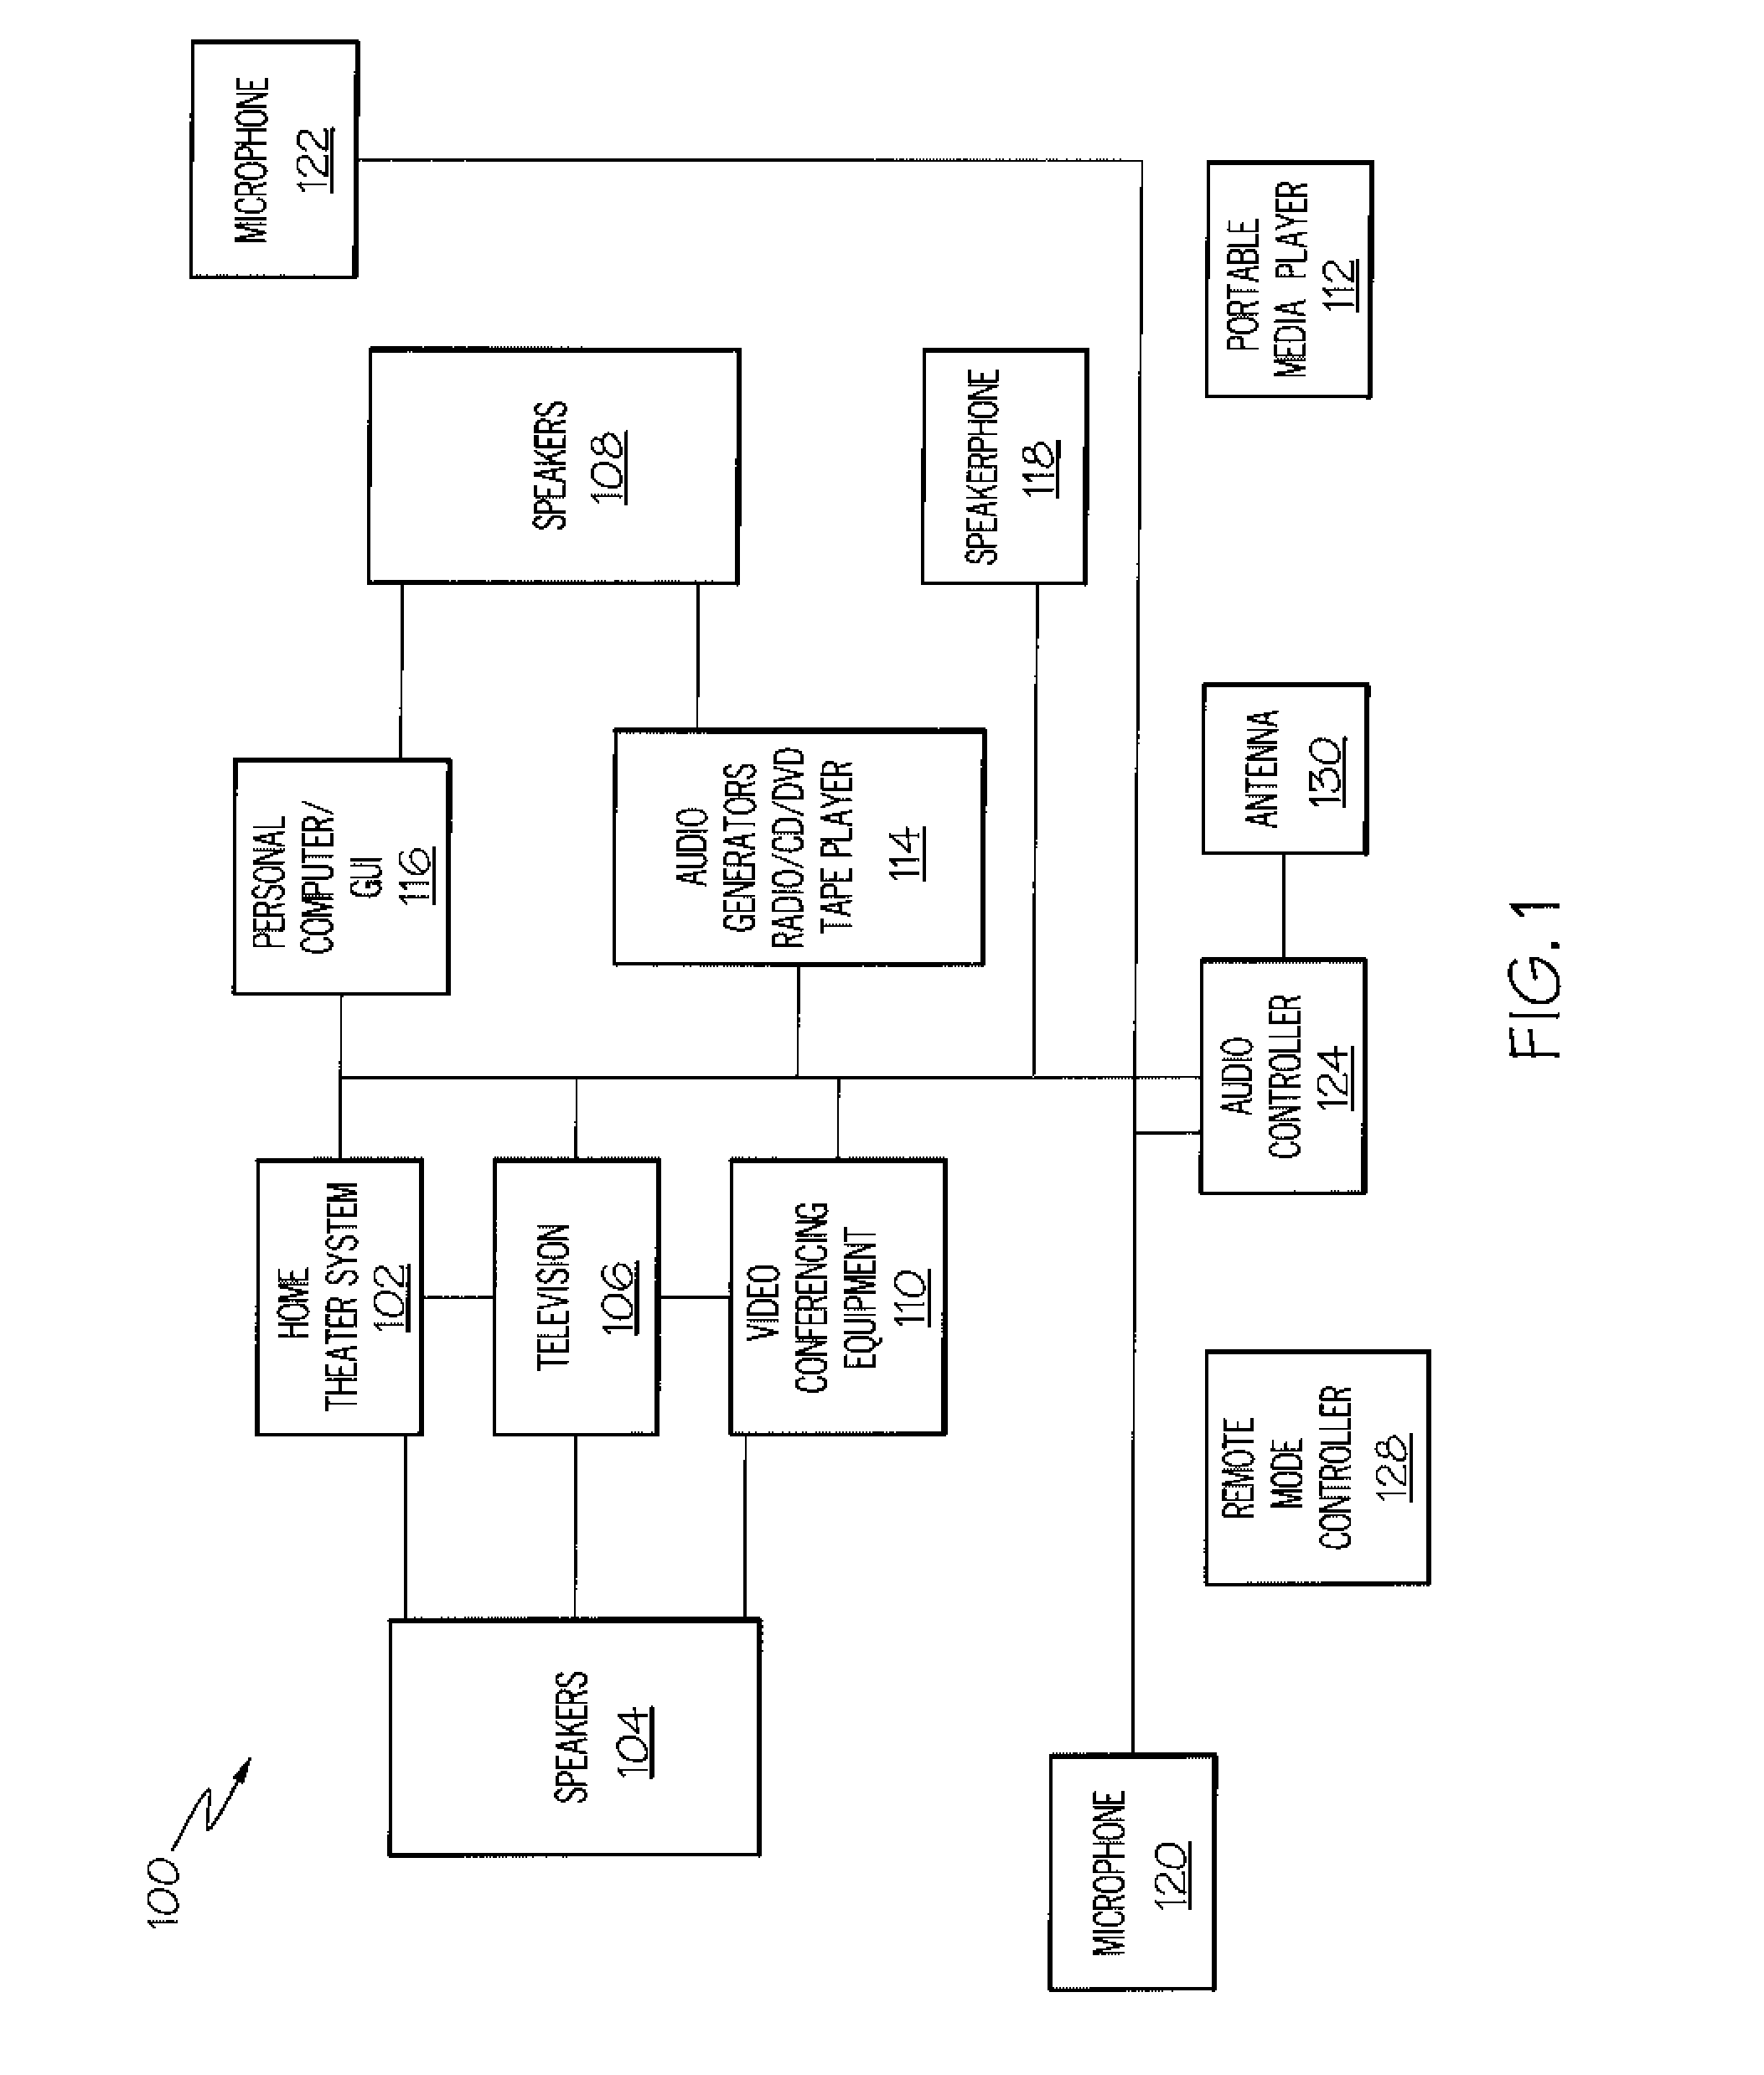 Systems And Arrangements For Controlling Audio Levels Based On User Selectable Parameters